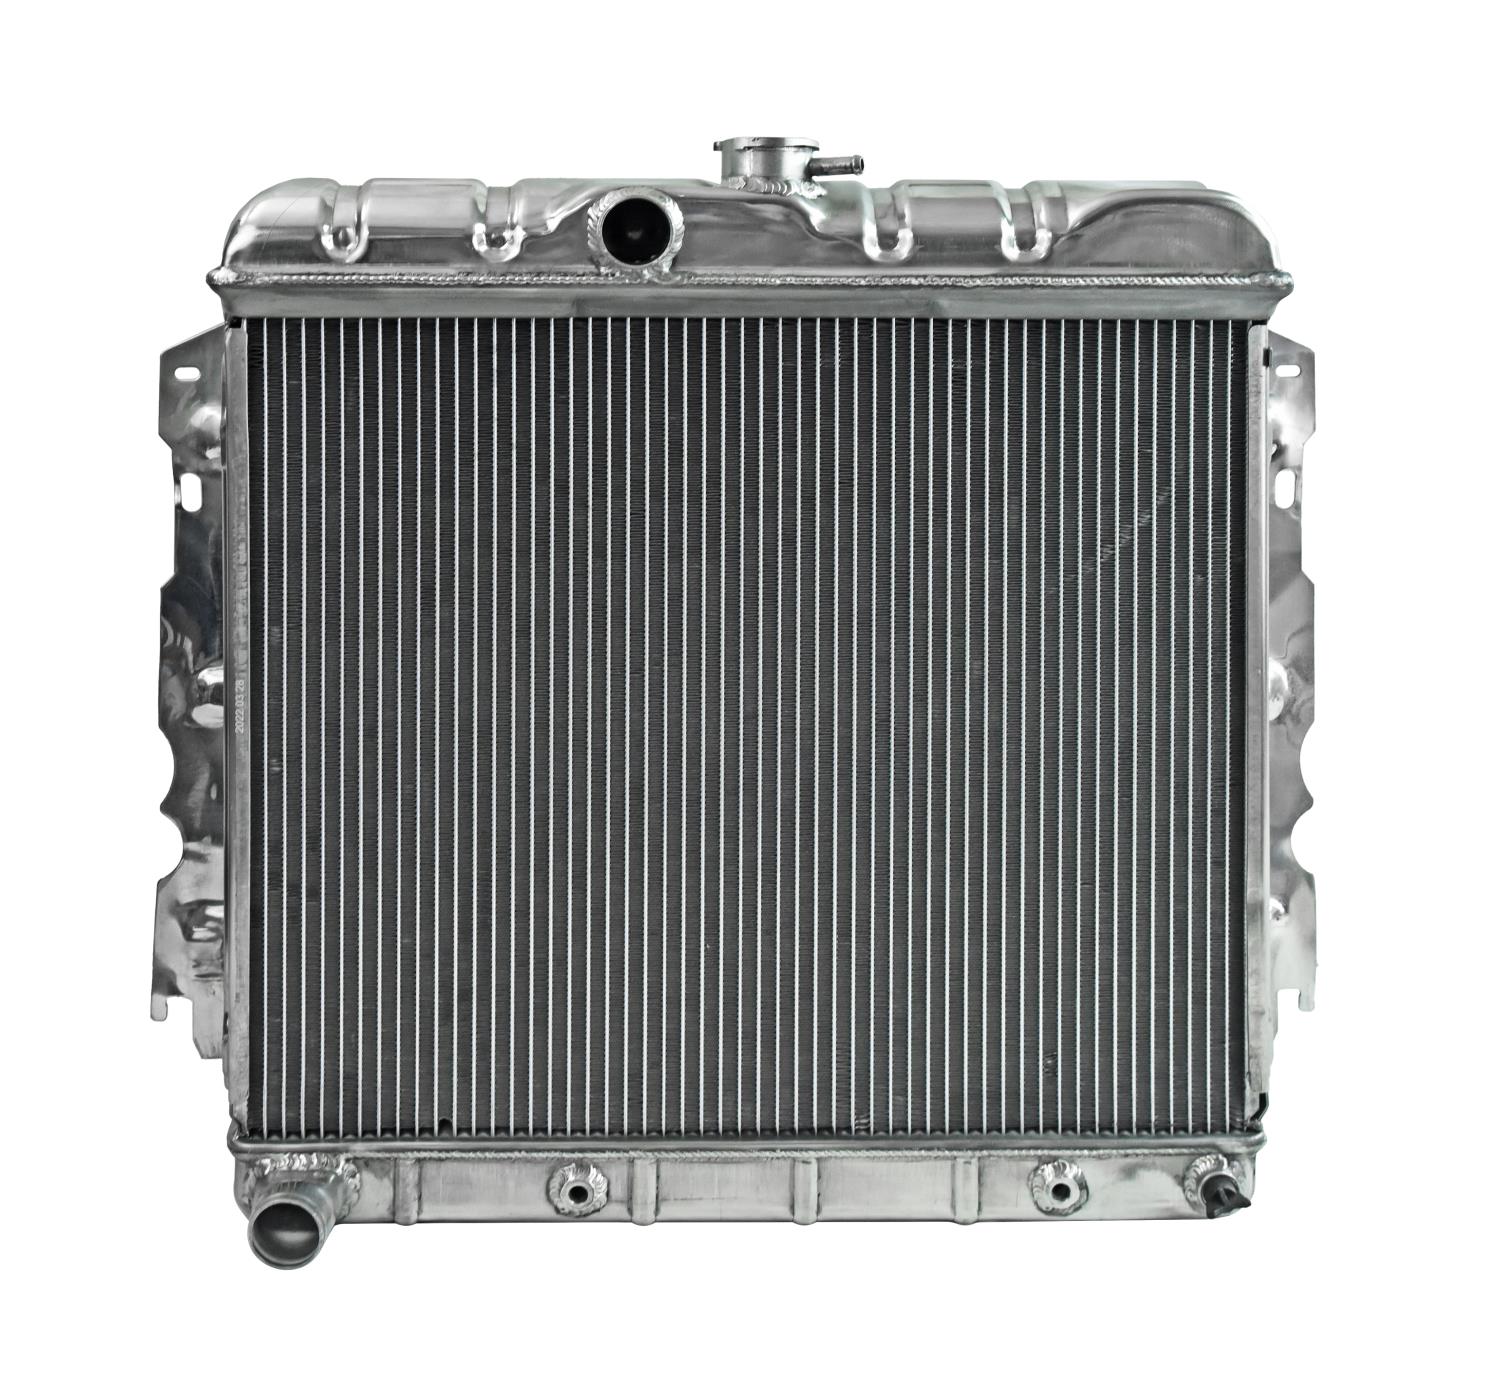 Reproduction Aluminum Radiator for Select 1966-1969 Mopar B-Bodies With Small Block Engines